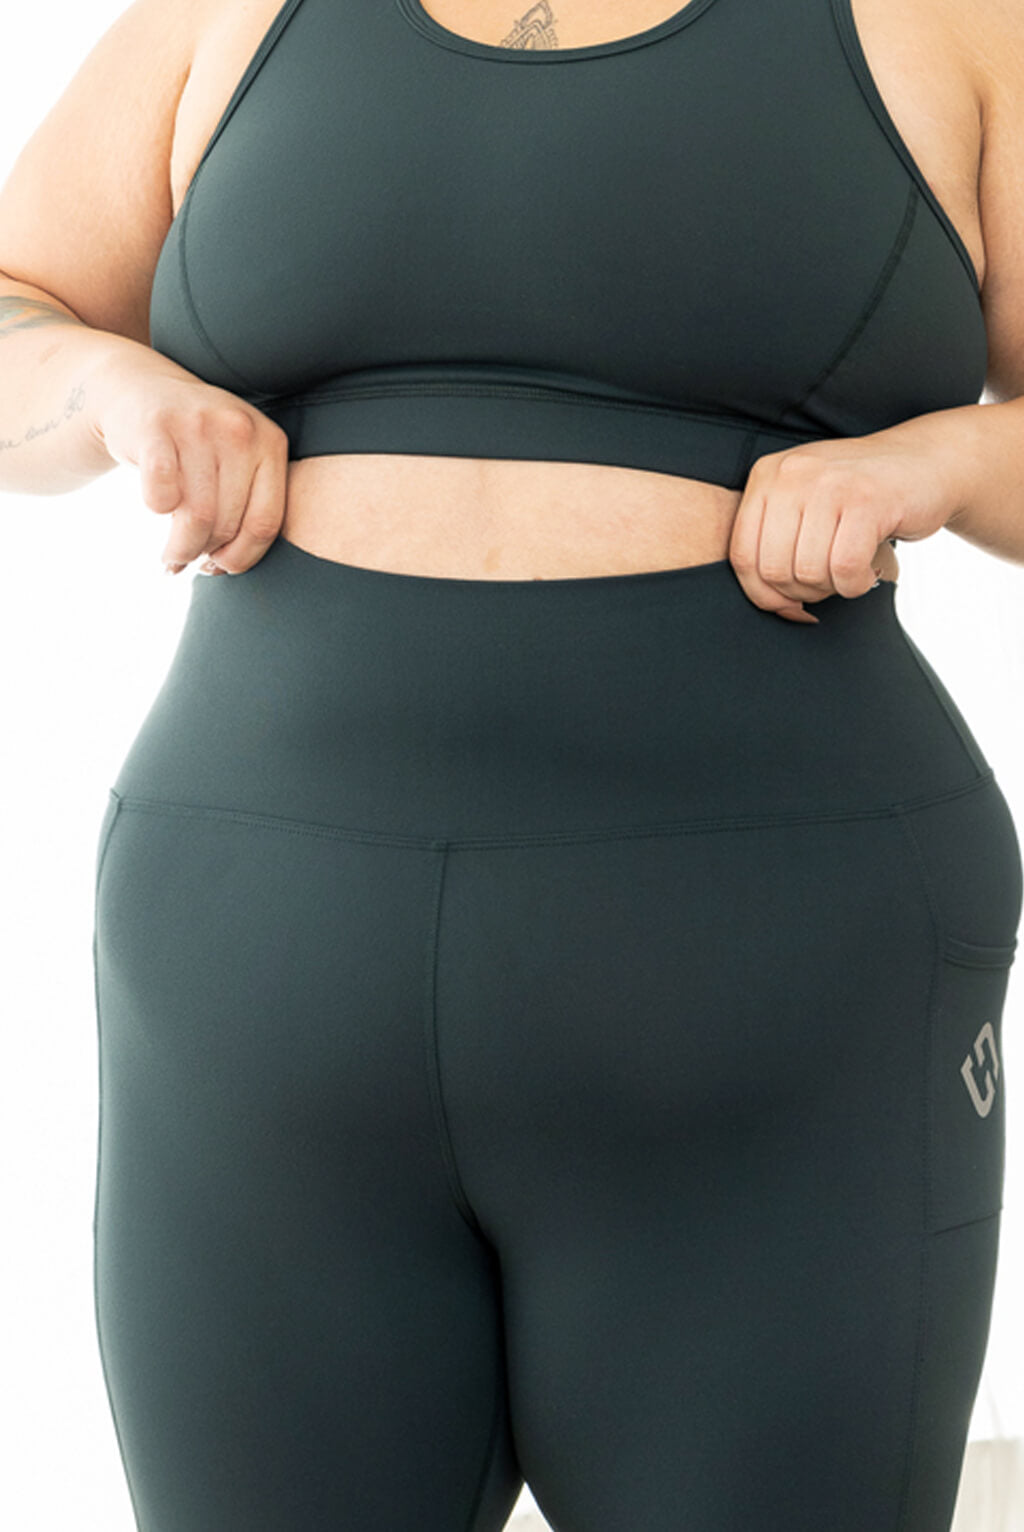 plus size capri leggings with pockets in evergreen, high compression waist band